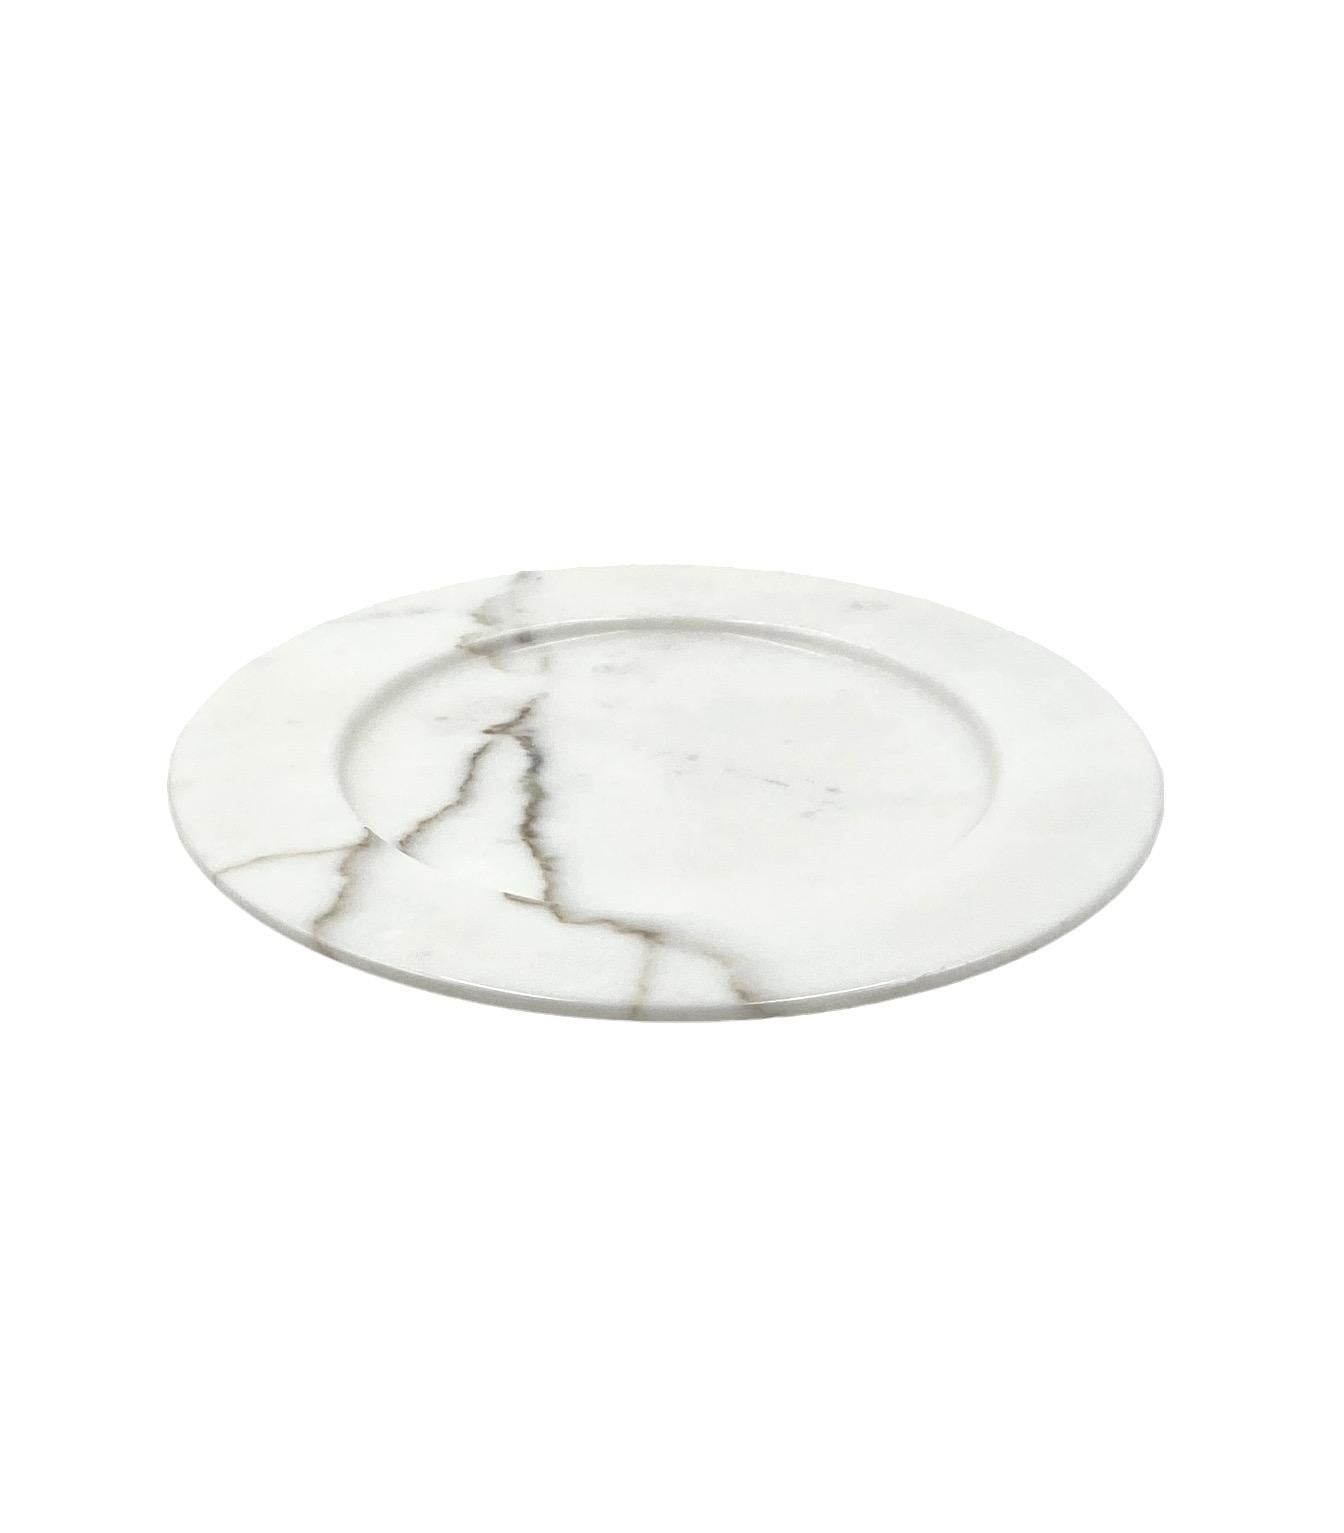 White Carrara marble centerpiece / plate, Up&Up Italy, 1970s For Sale 7